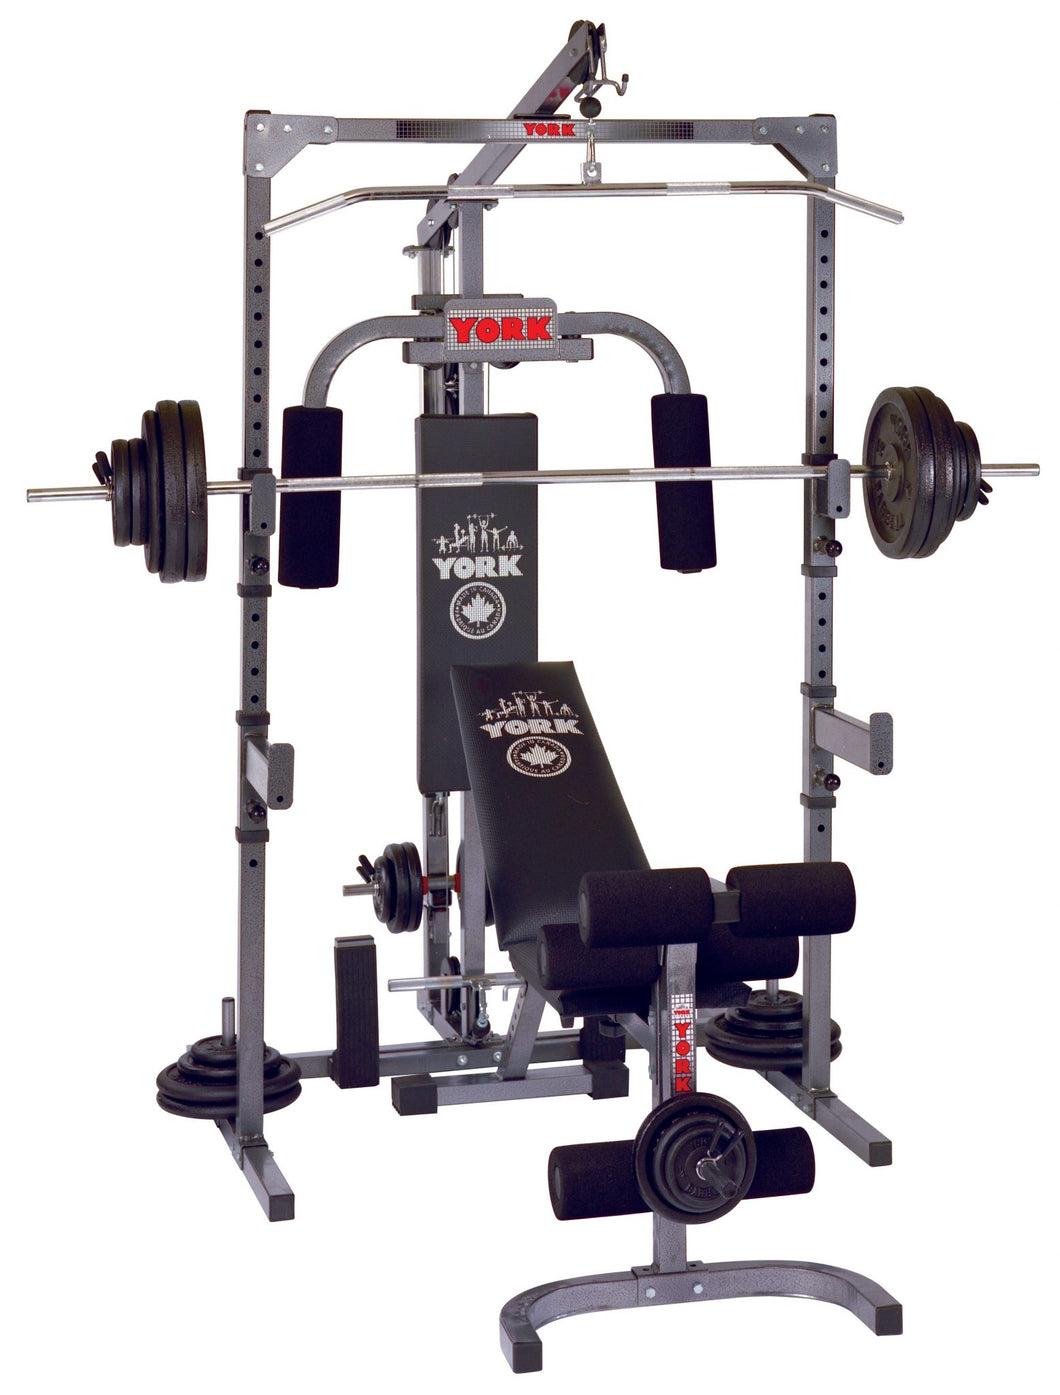 5 Day York Workout Equipment Canada for Gym